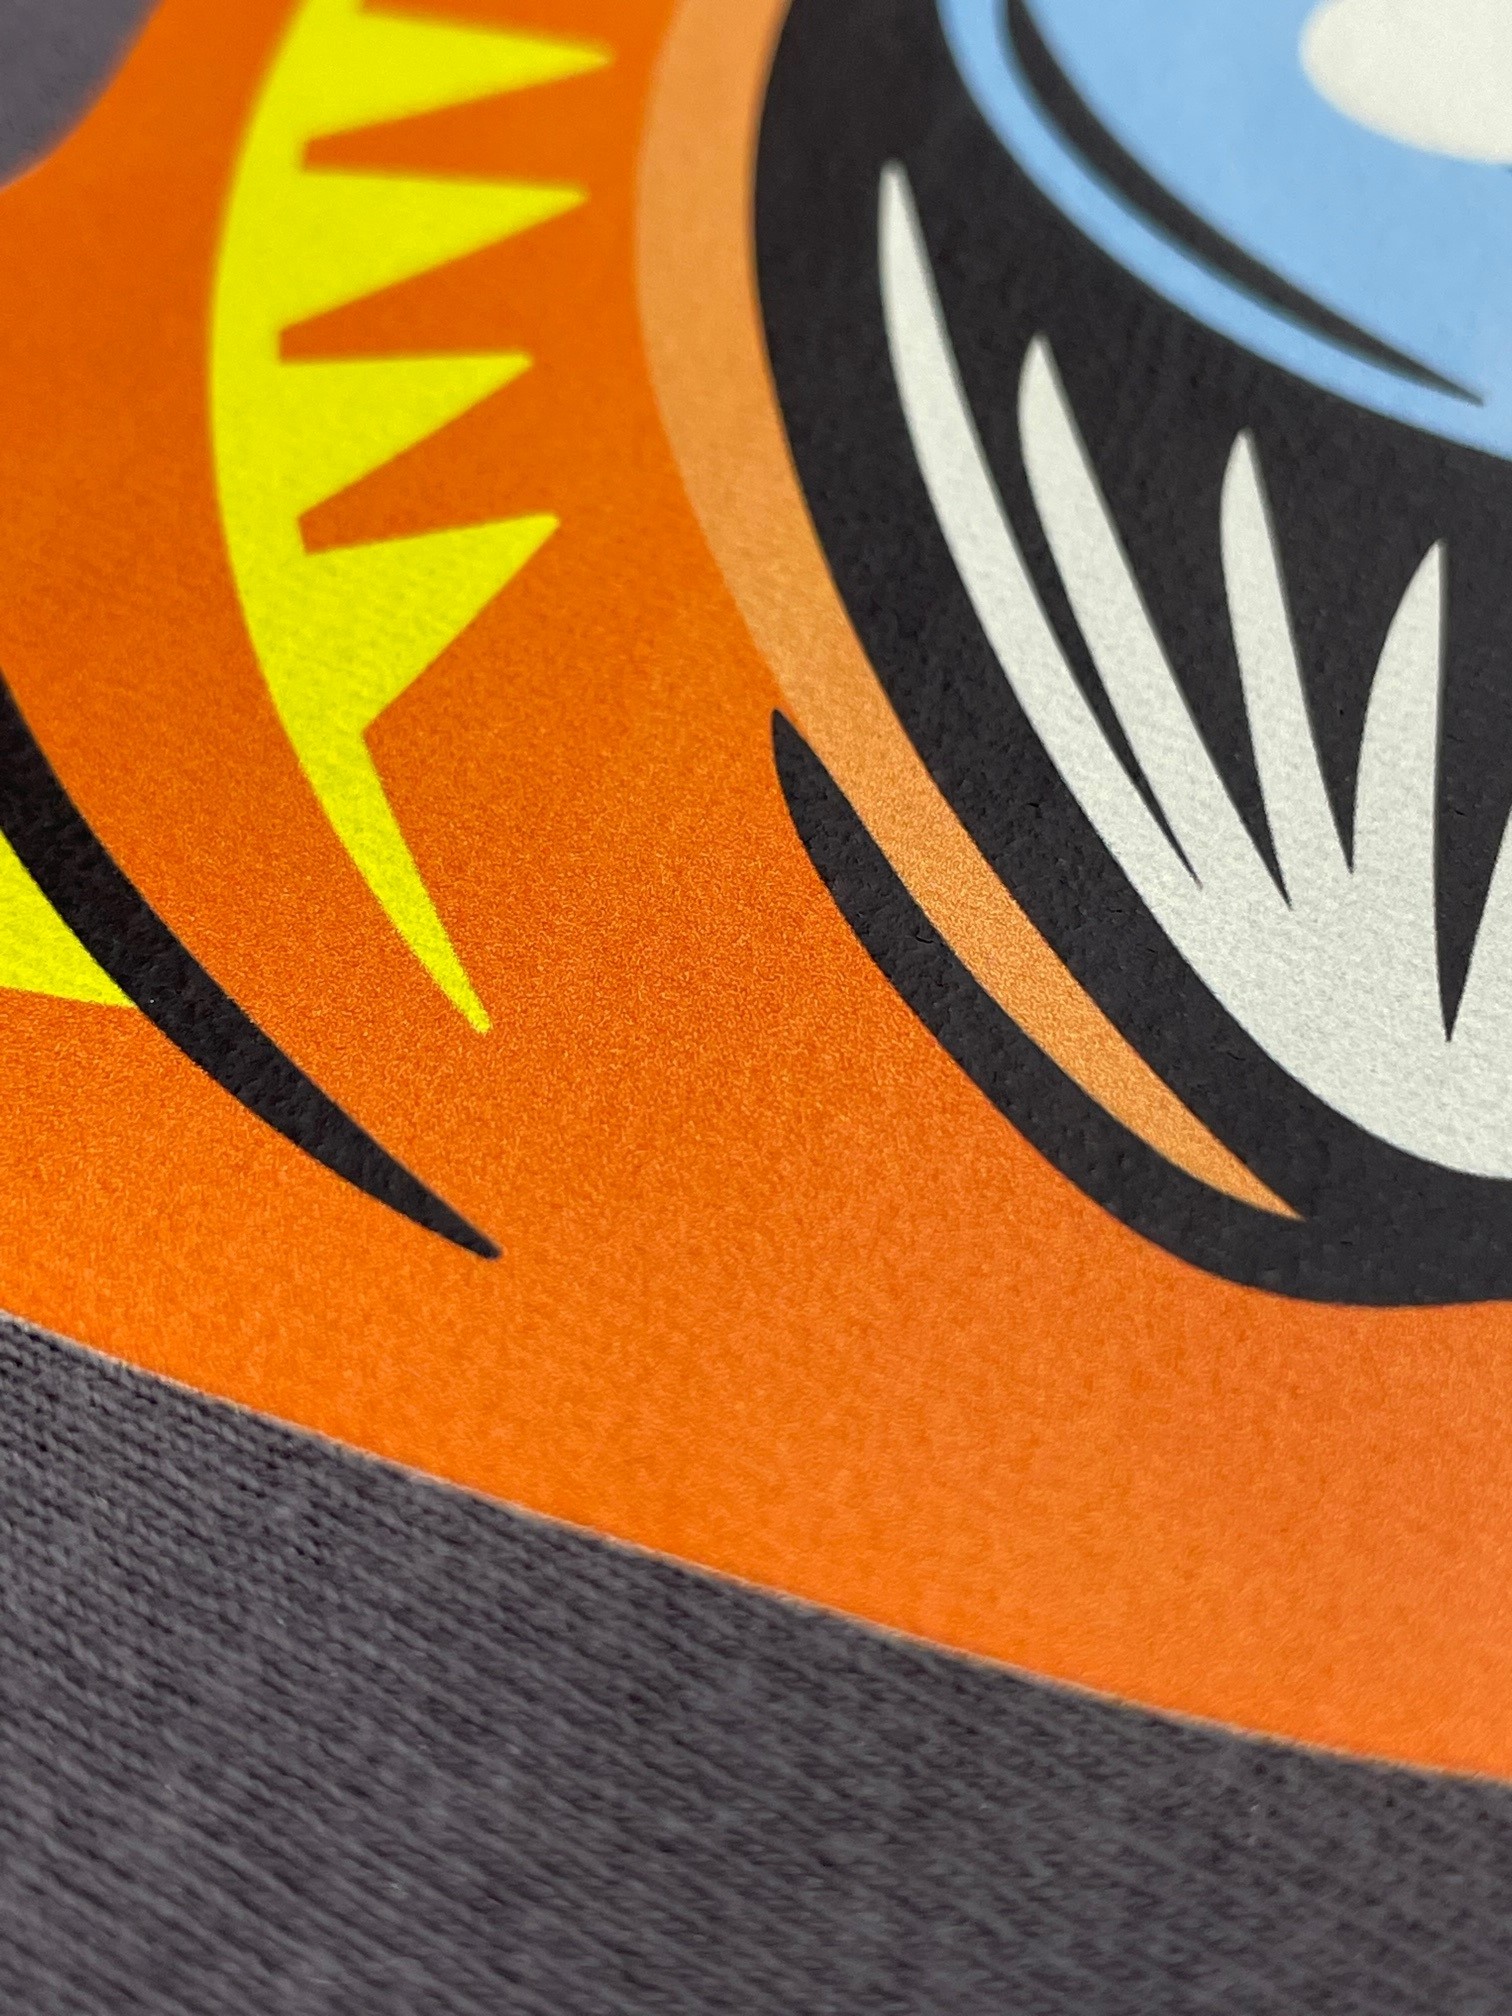 A photo of an orange illustration on a shirt to show detail of a direct to film transfer